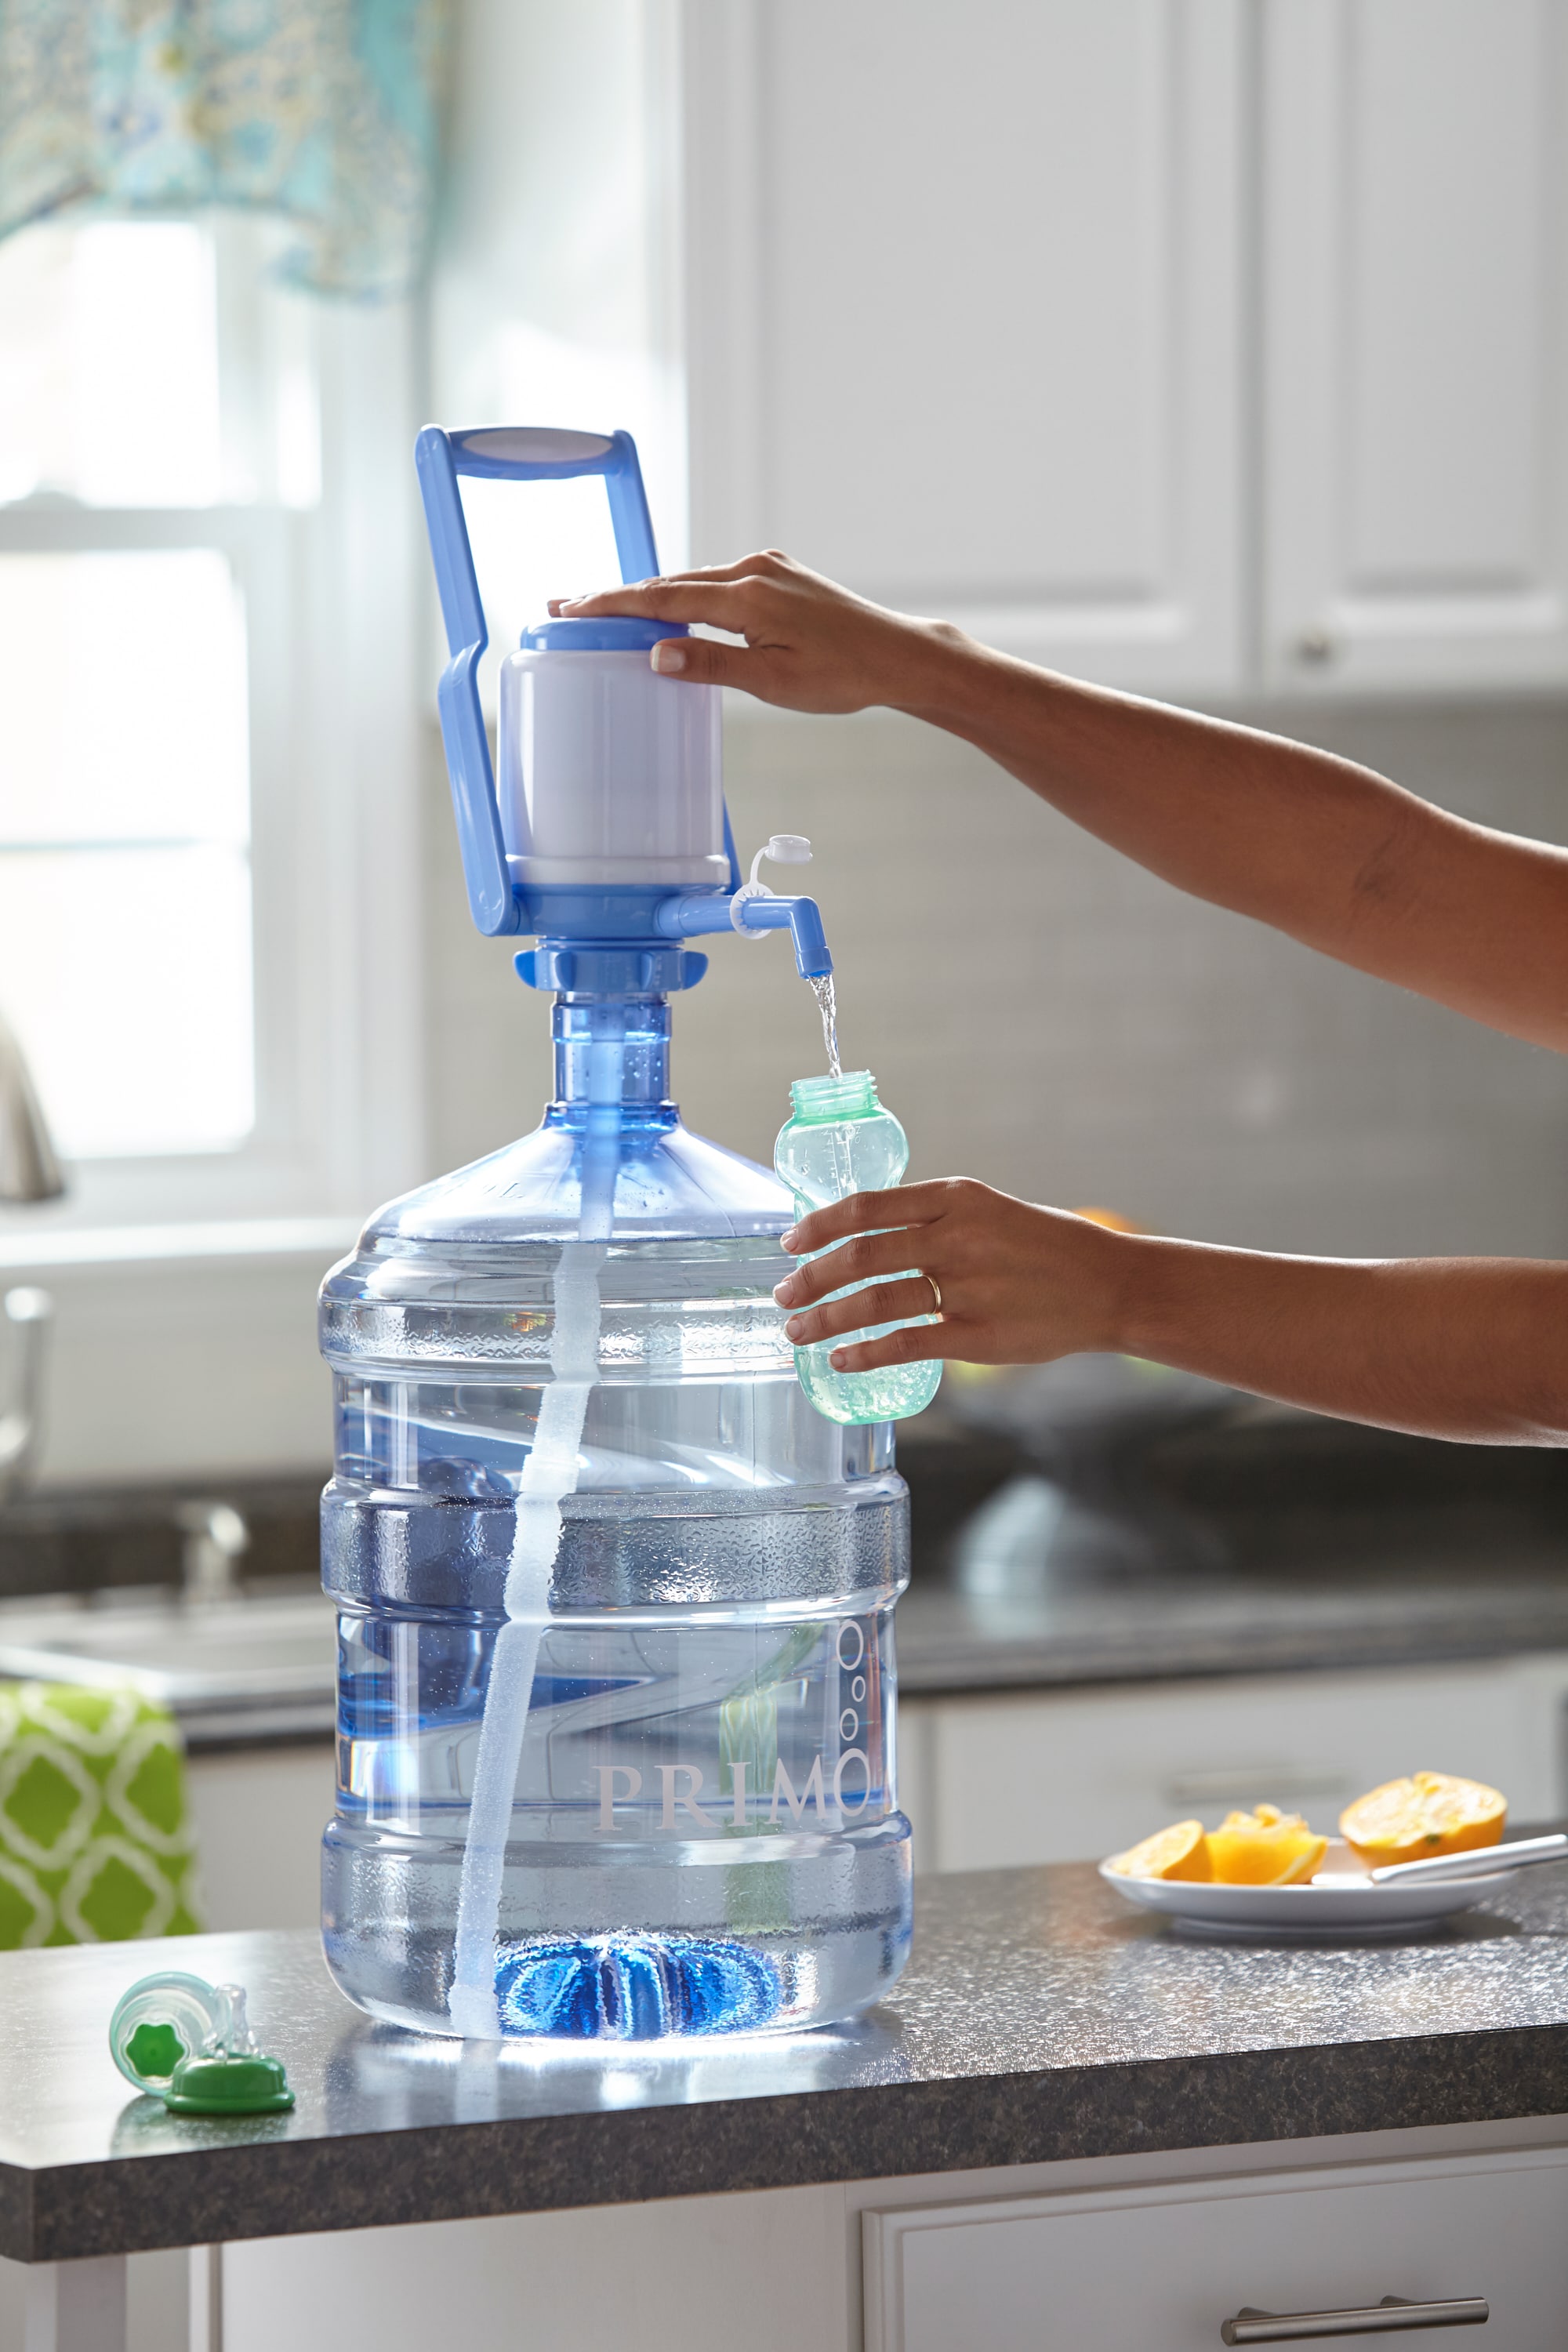 Refill 19L Spring Water Bottle for Water Coolers